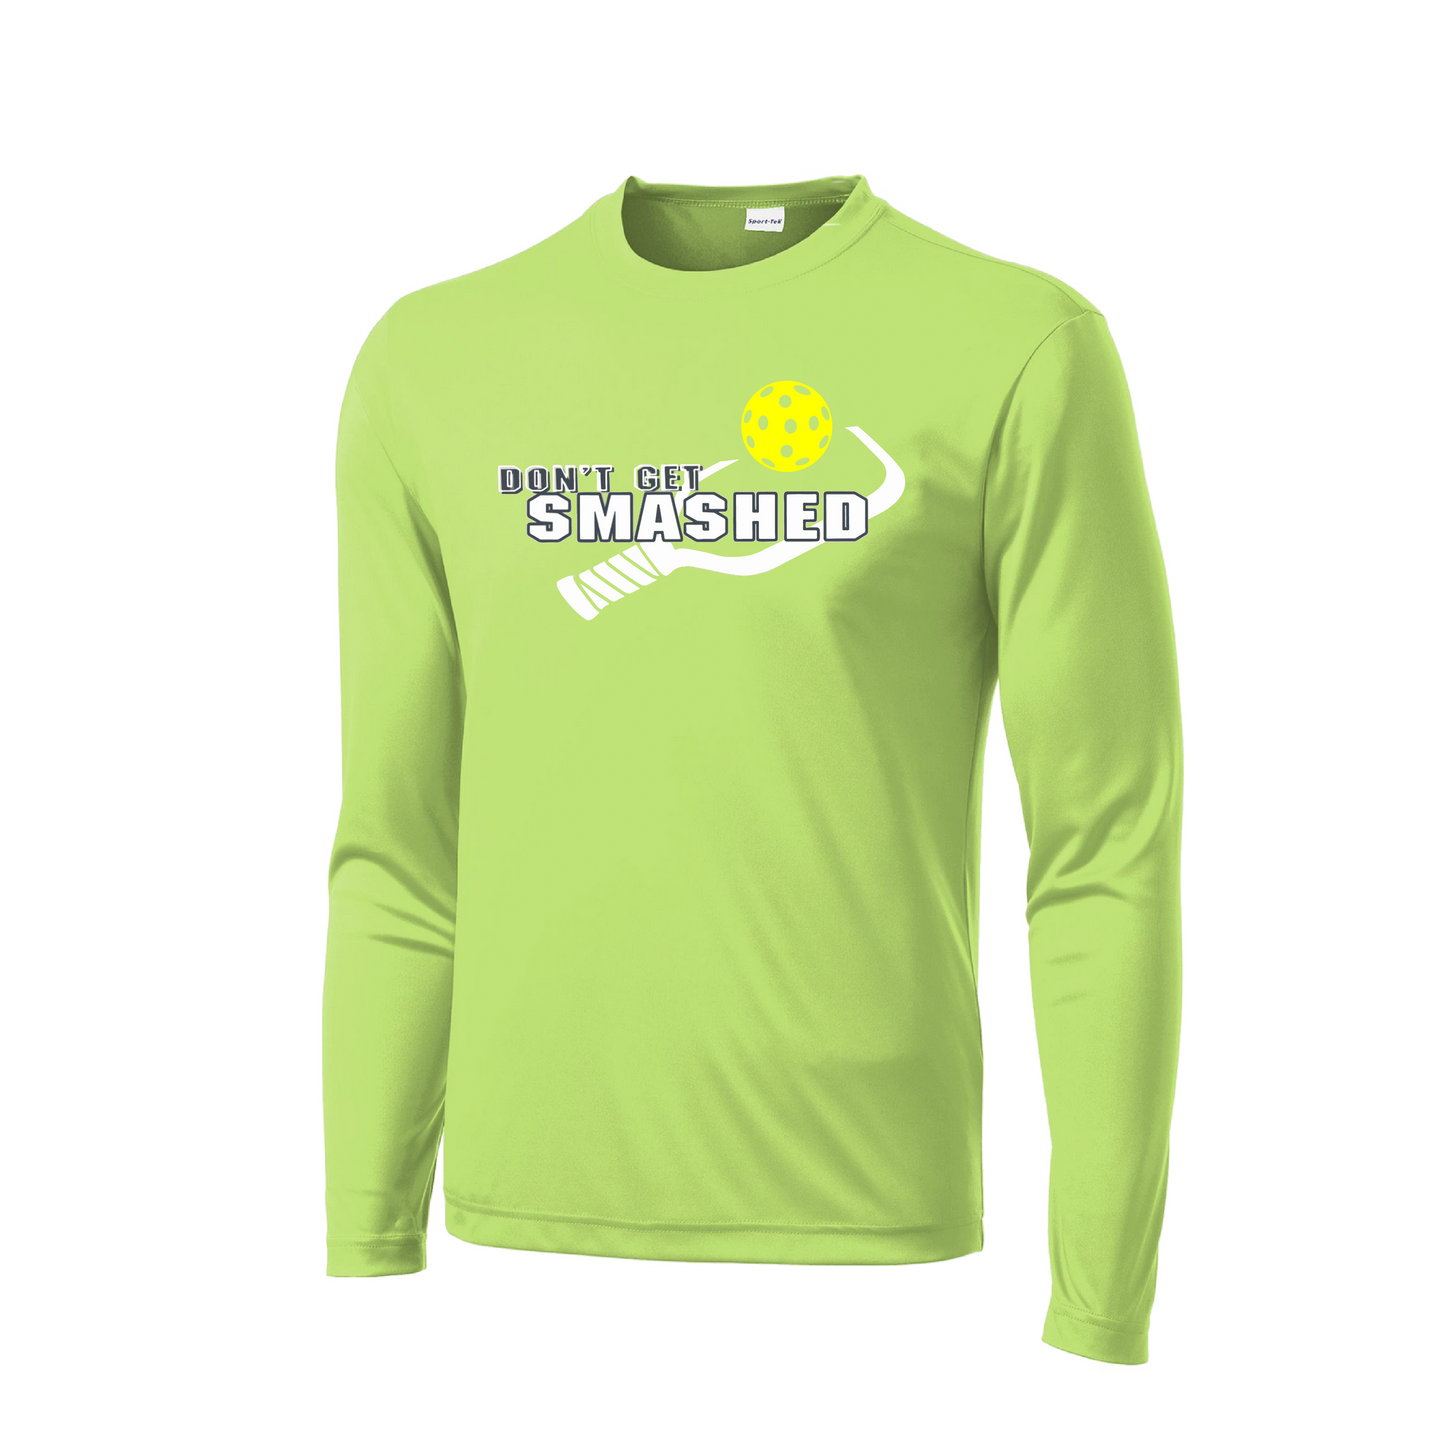 Stay comfortable and stylish with this breathable, lightweight Men's long sleeve shirt! PosiCharge technology ensures vivid colors and a well-maintained logo, setting you apart from the crowd. The removable tag and set-in sleeves are designed to keep you comfortable no matter where your day takes you.  Pickleball colors include purple, white or yellow. 